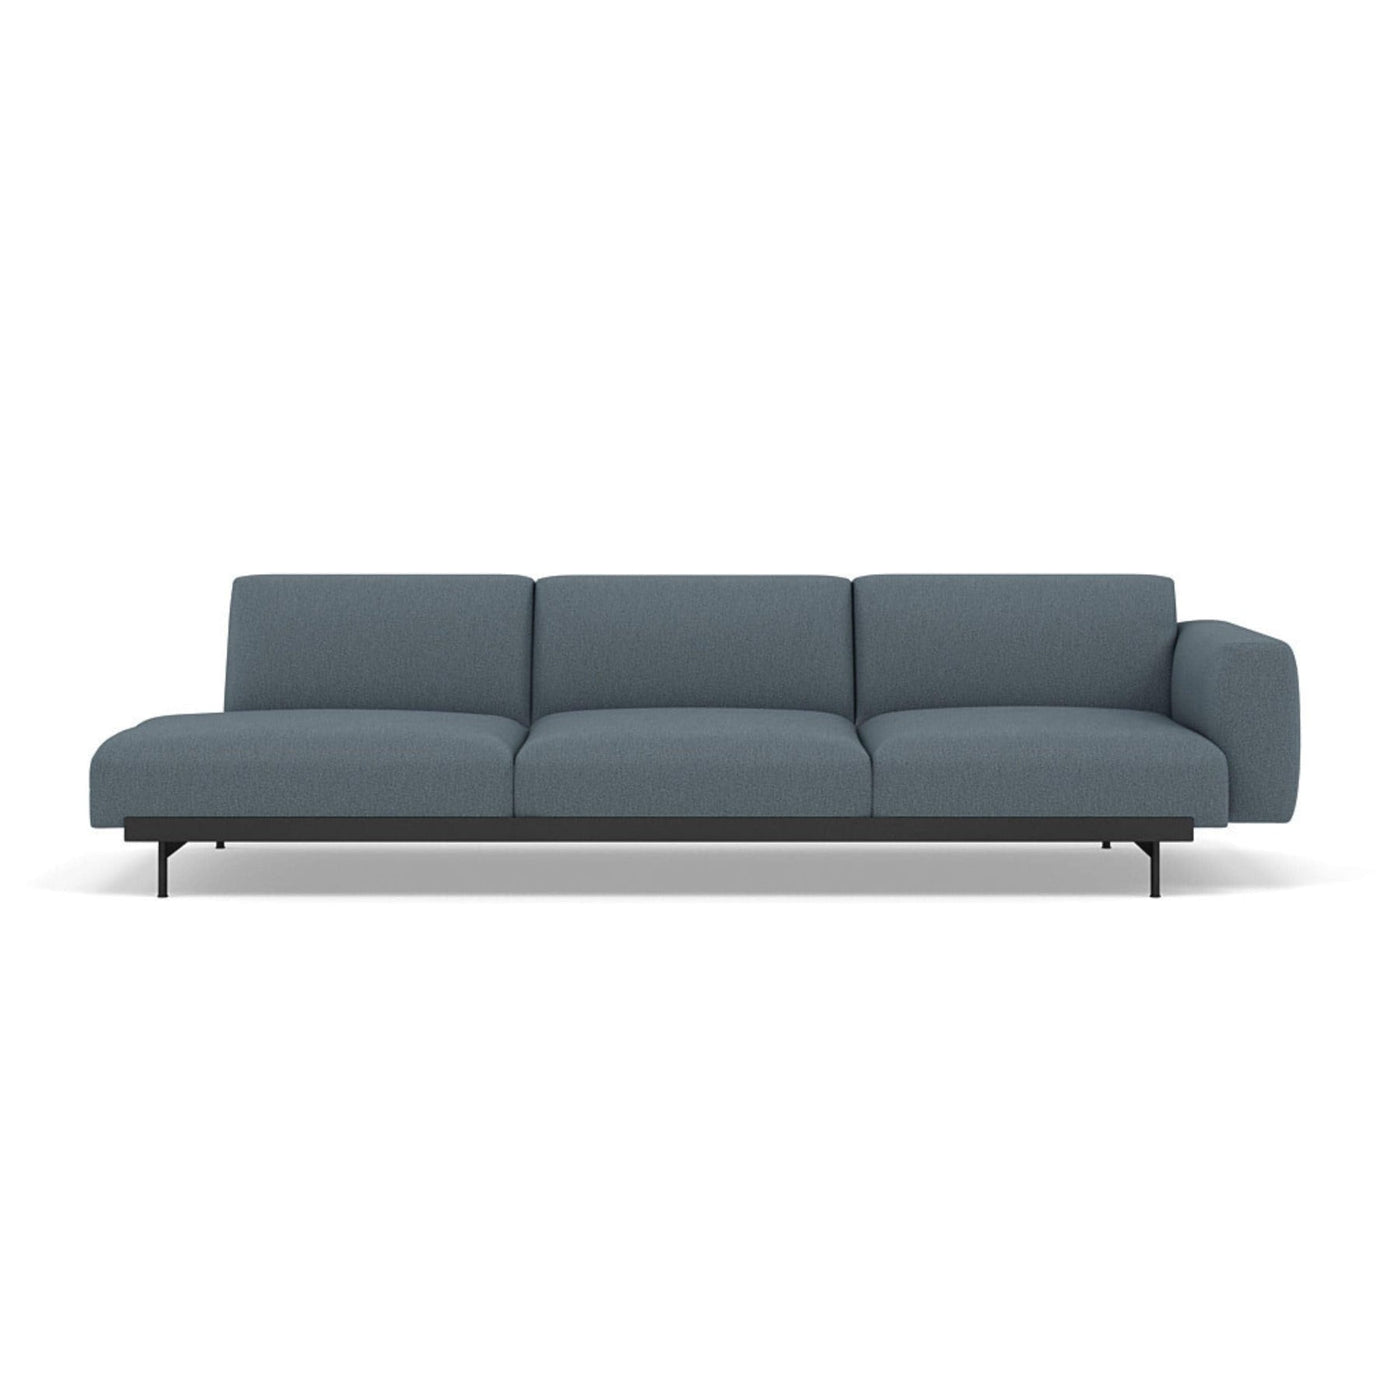 Muuto In Situ Sofa 3 seater configuration 2 in clay 1 fabric. Made to order at someday designs. #colour_clay-1-blue